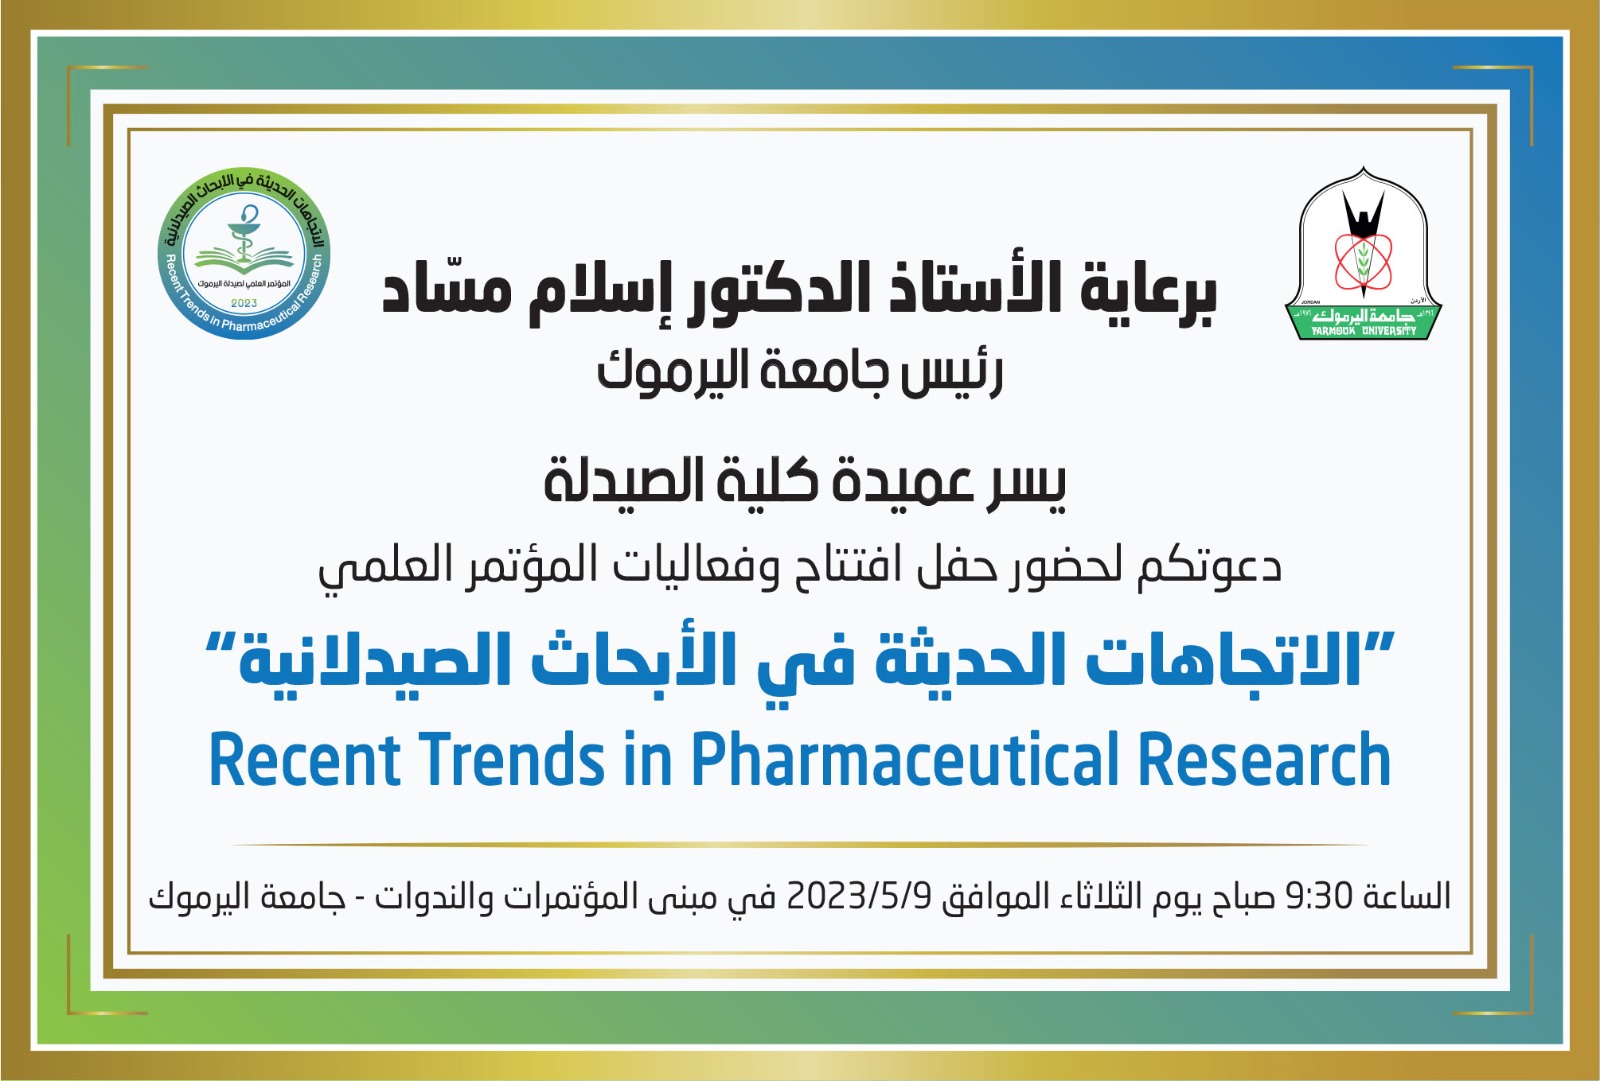 “Recent Trends in Pharmaceutical Research